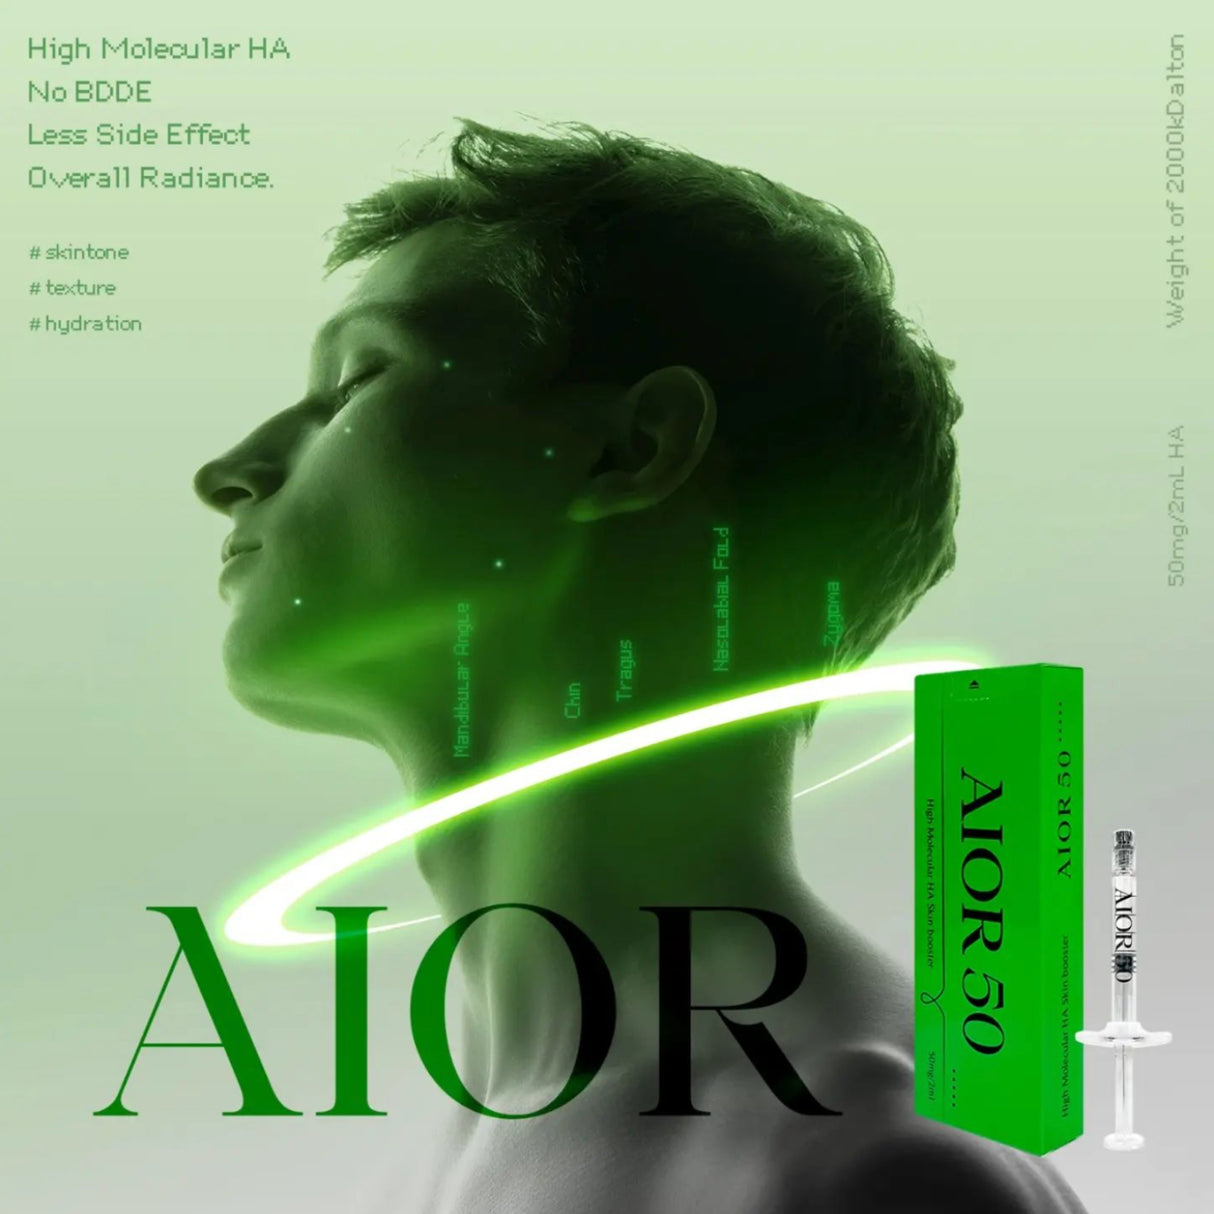 AIOR 50 is the premium solution of high molecular weight hyaluronic acid and contains concentration of 50mg/2ml. 